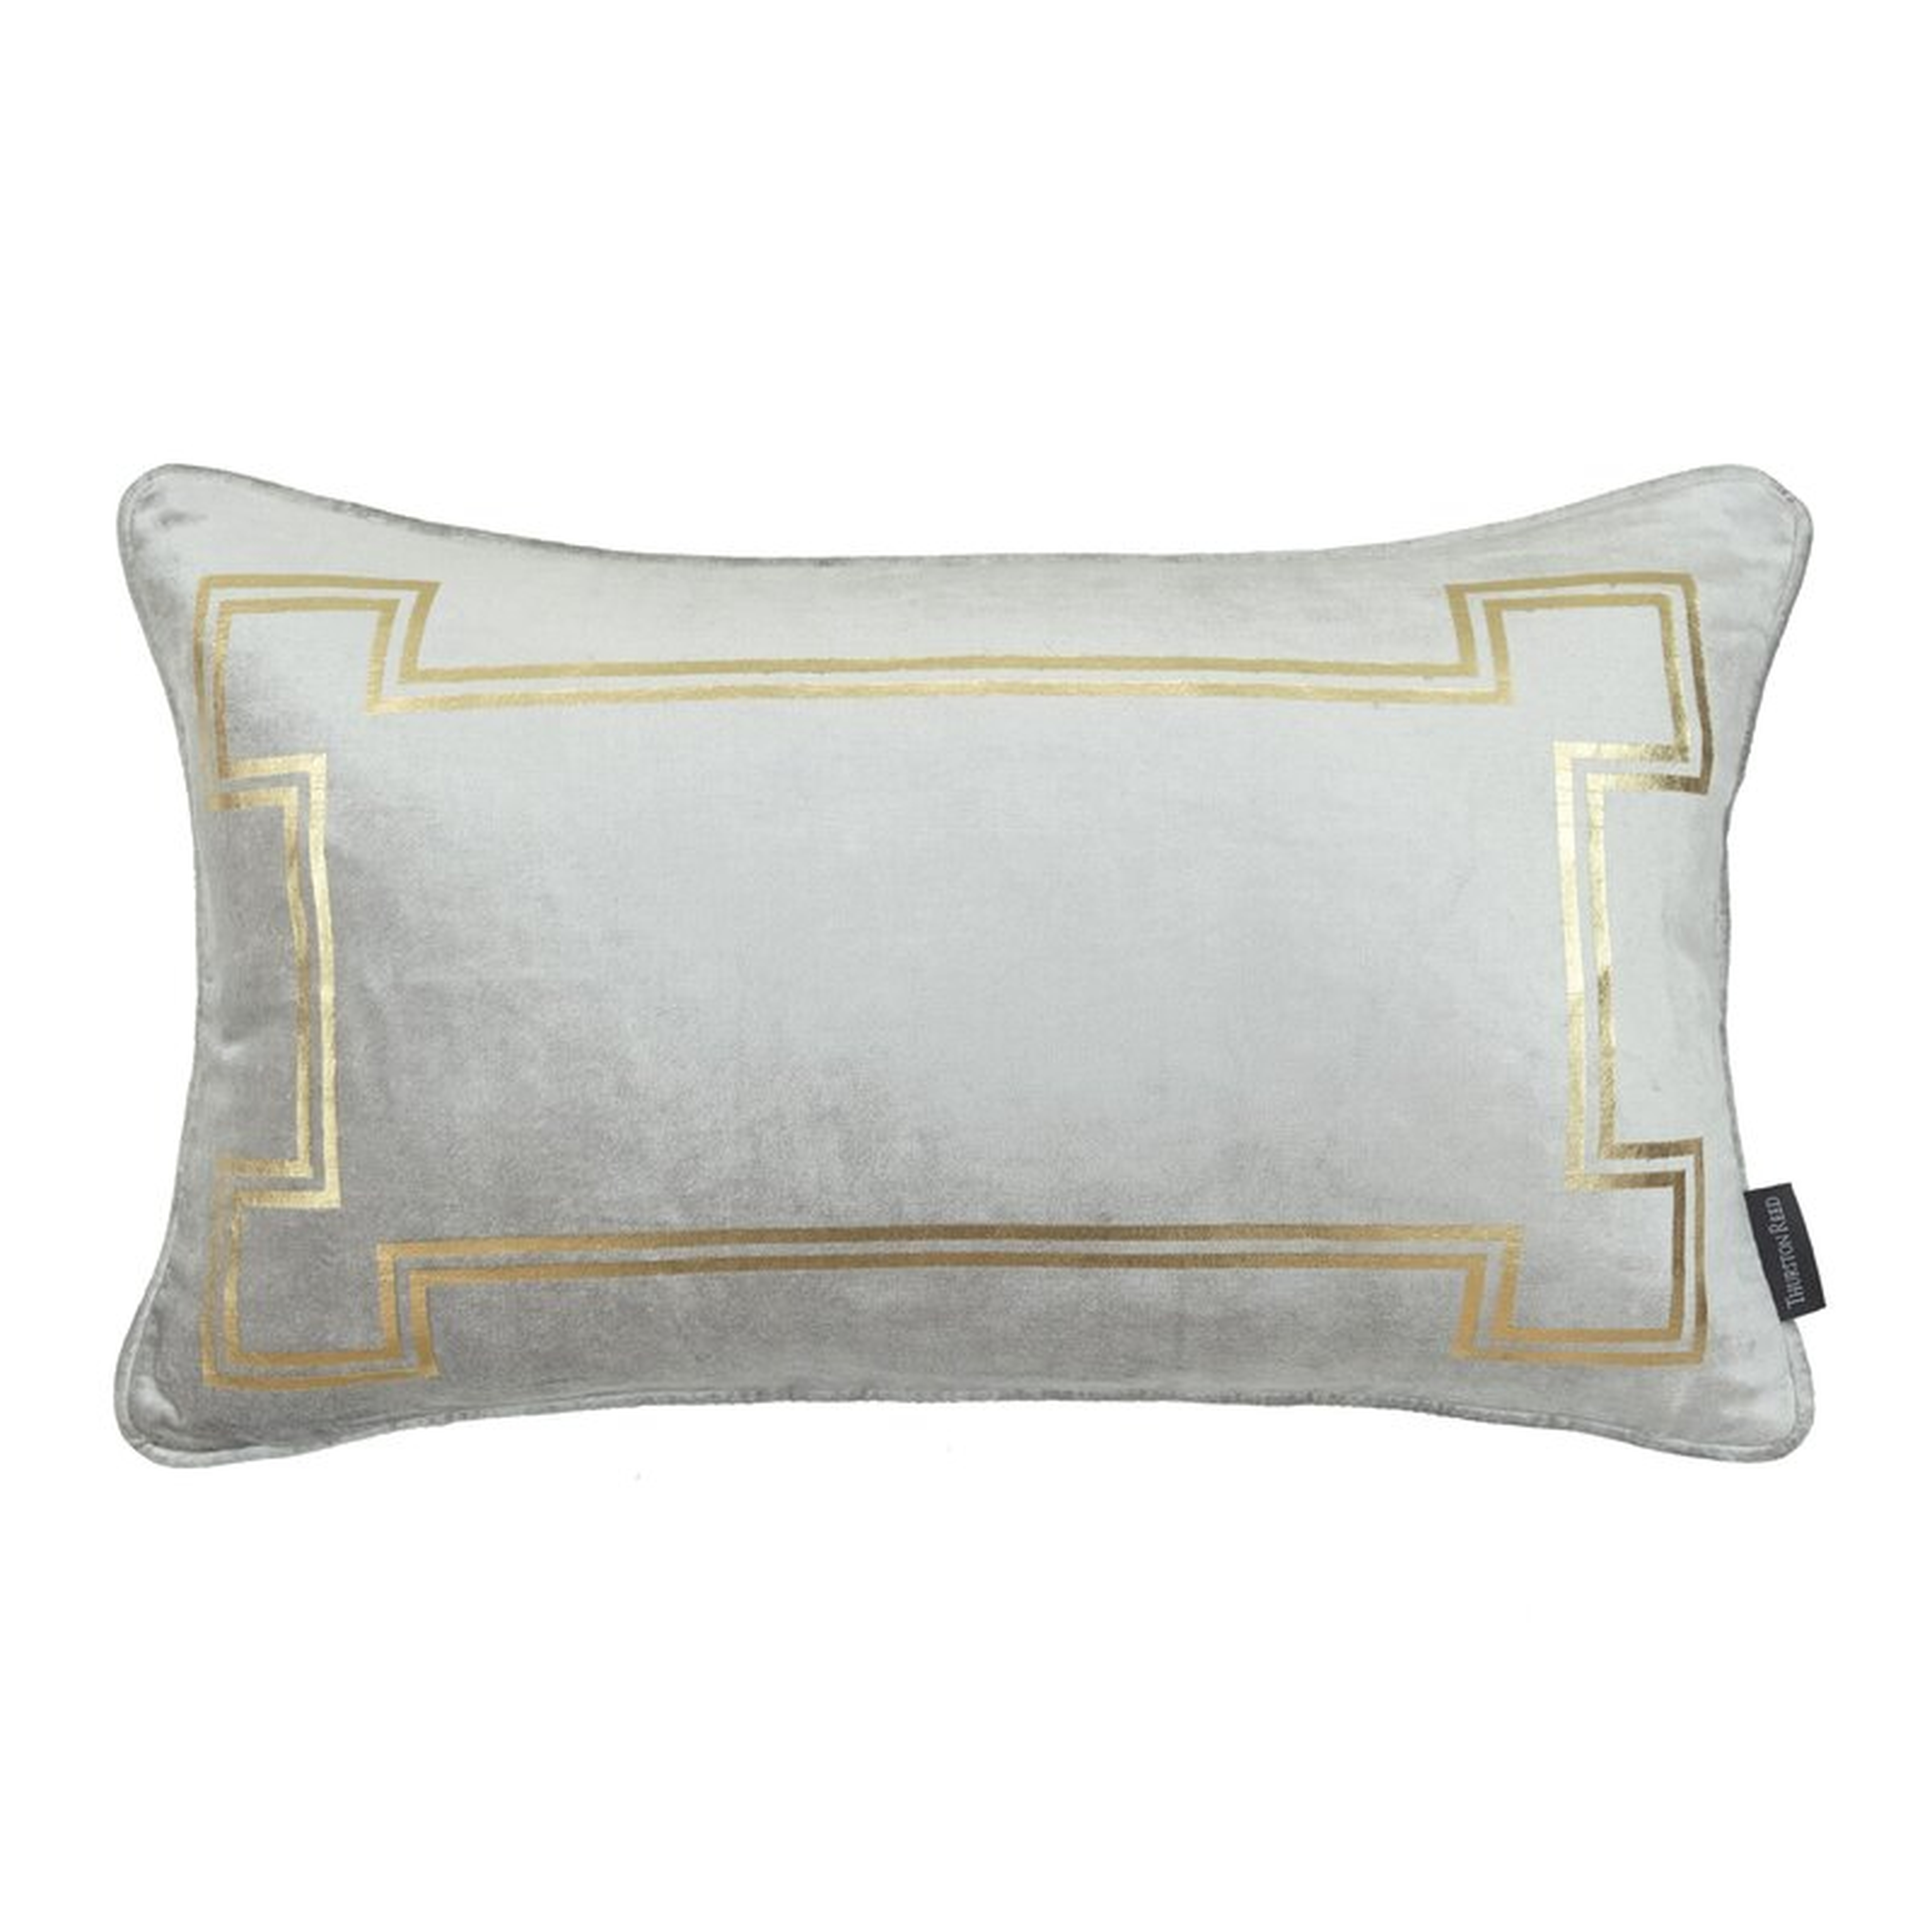 Thurston Reed Velvet Feathers Lumbar Pillow Color: Cool Gray - Perigold